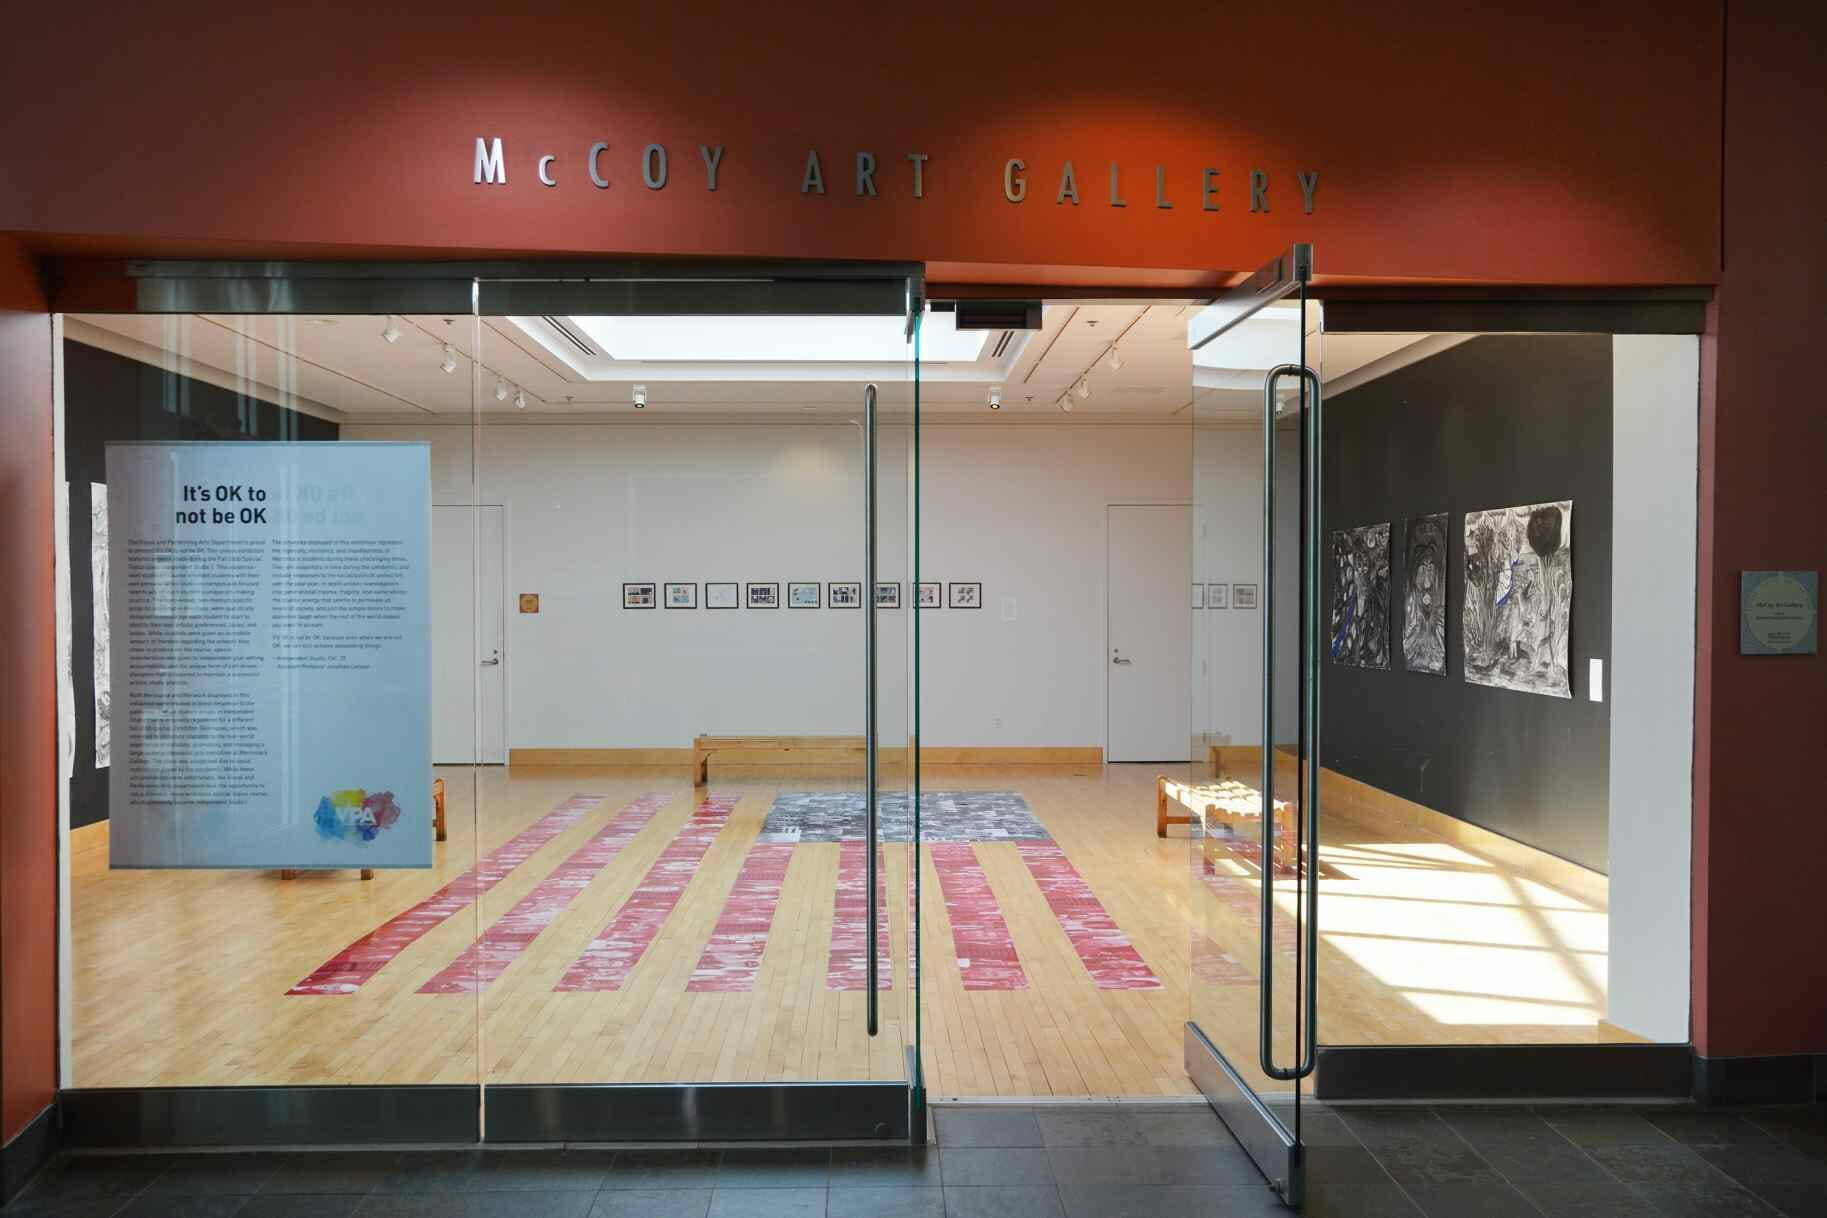 The exhibit, titled “It’s OK To Not Be OK,” on display in the McCoy Gallery.